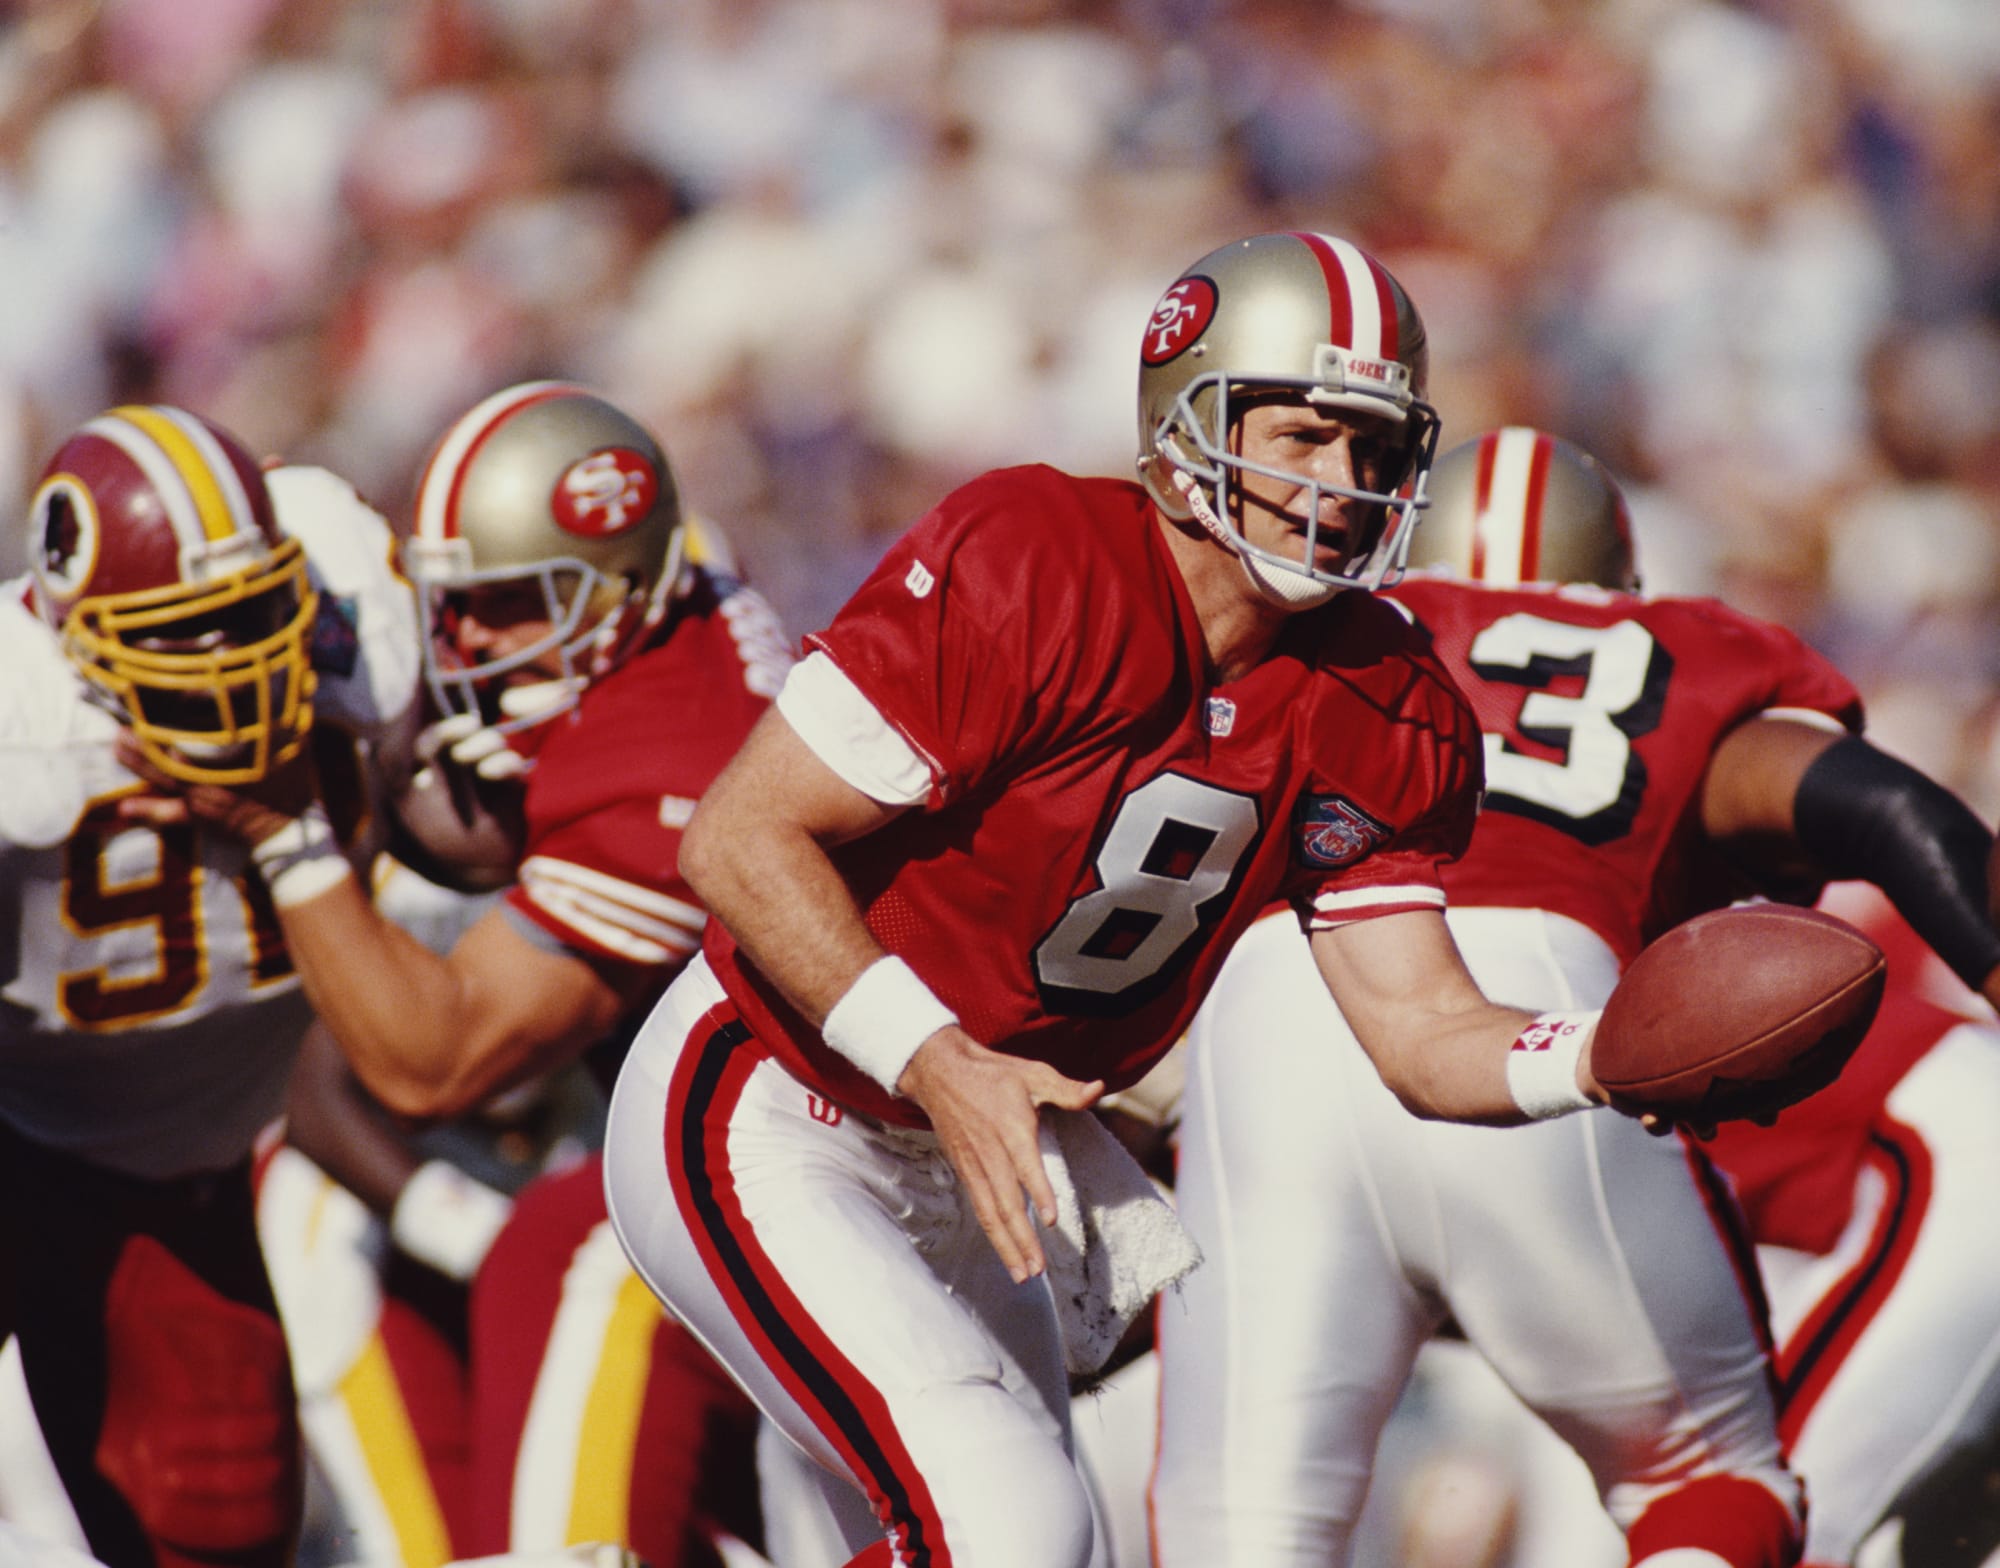 49ers uniforms through the years